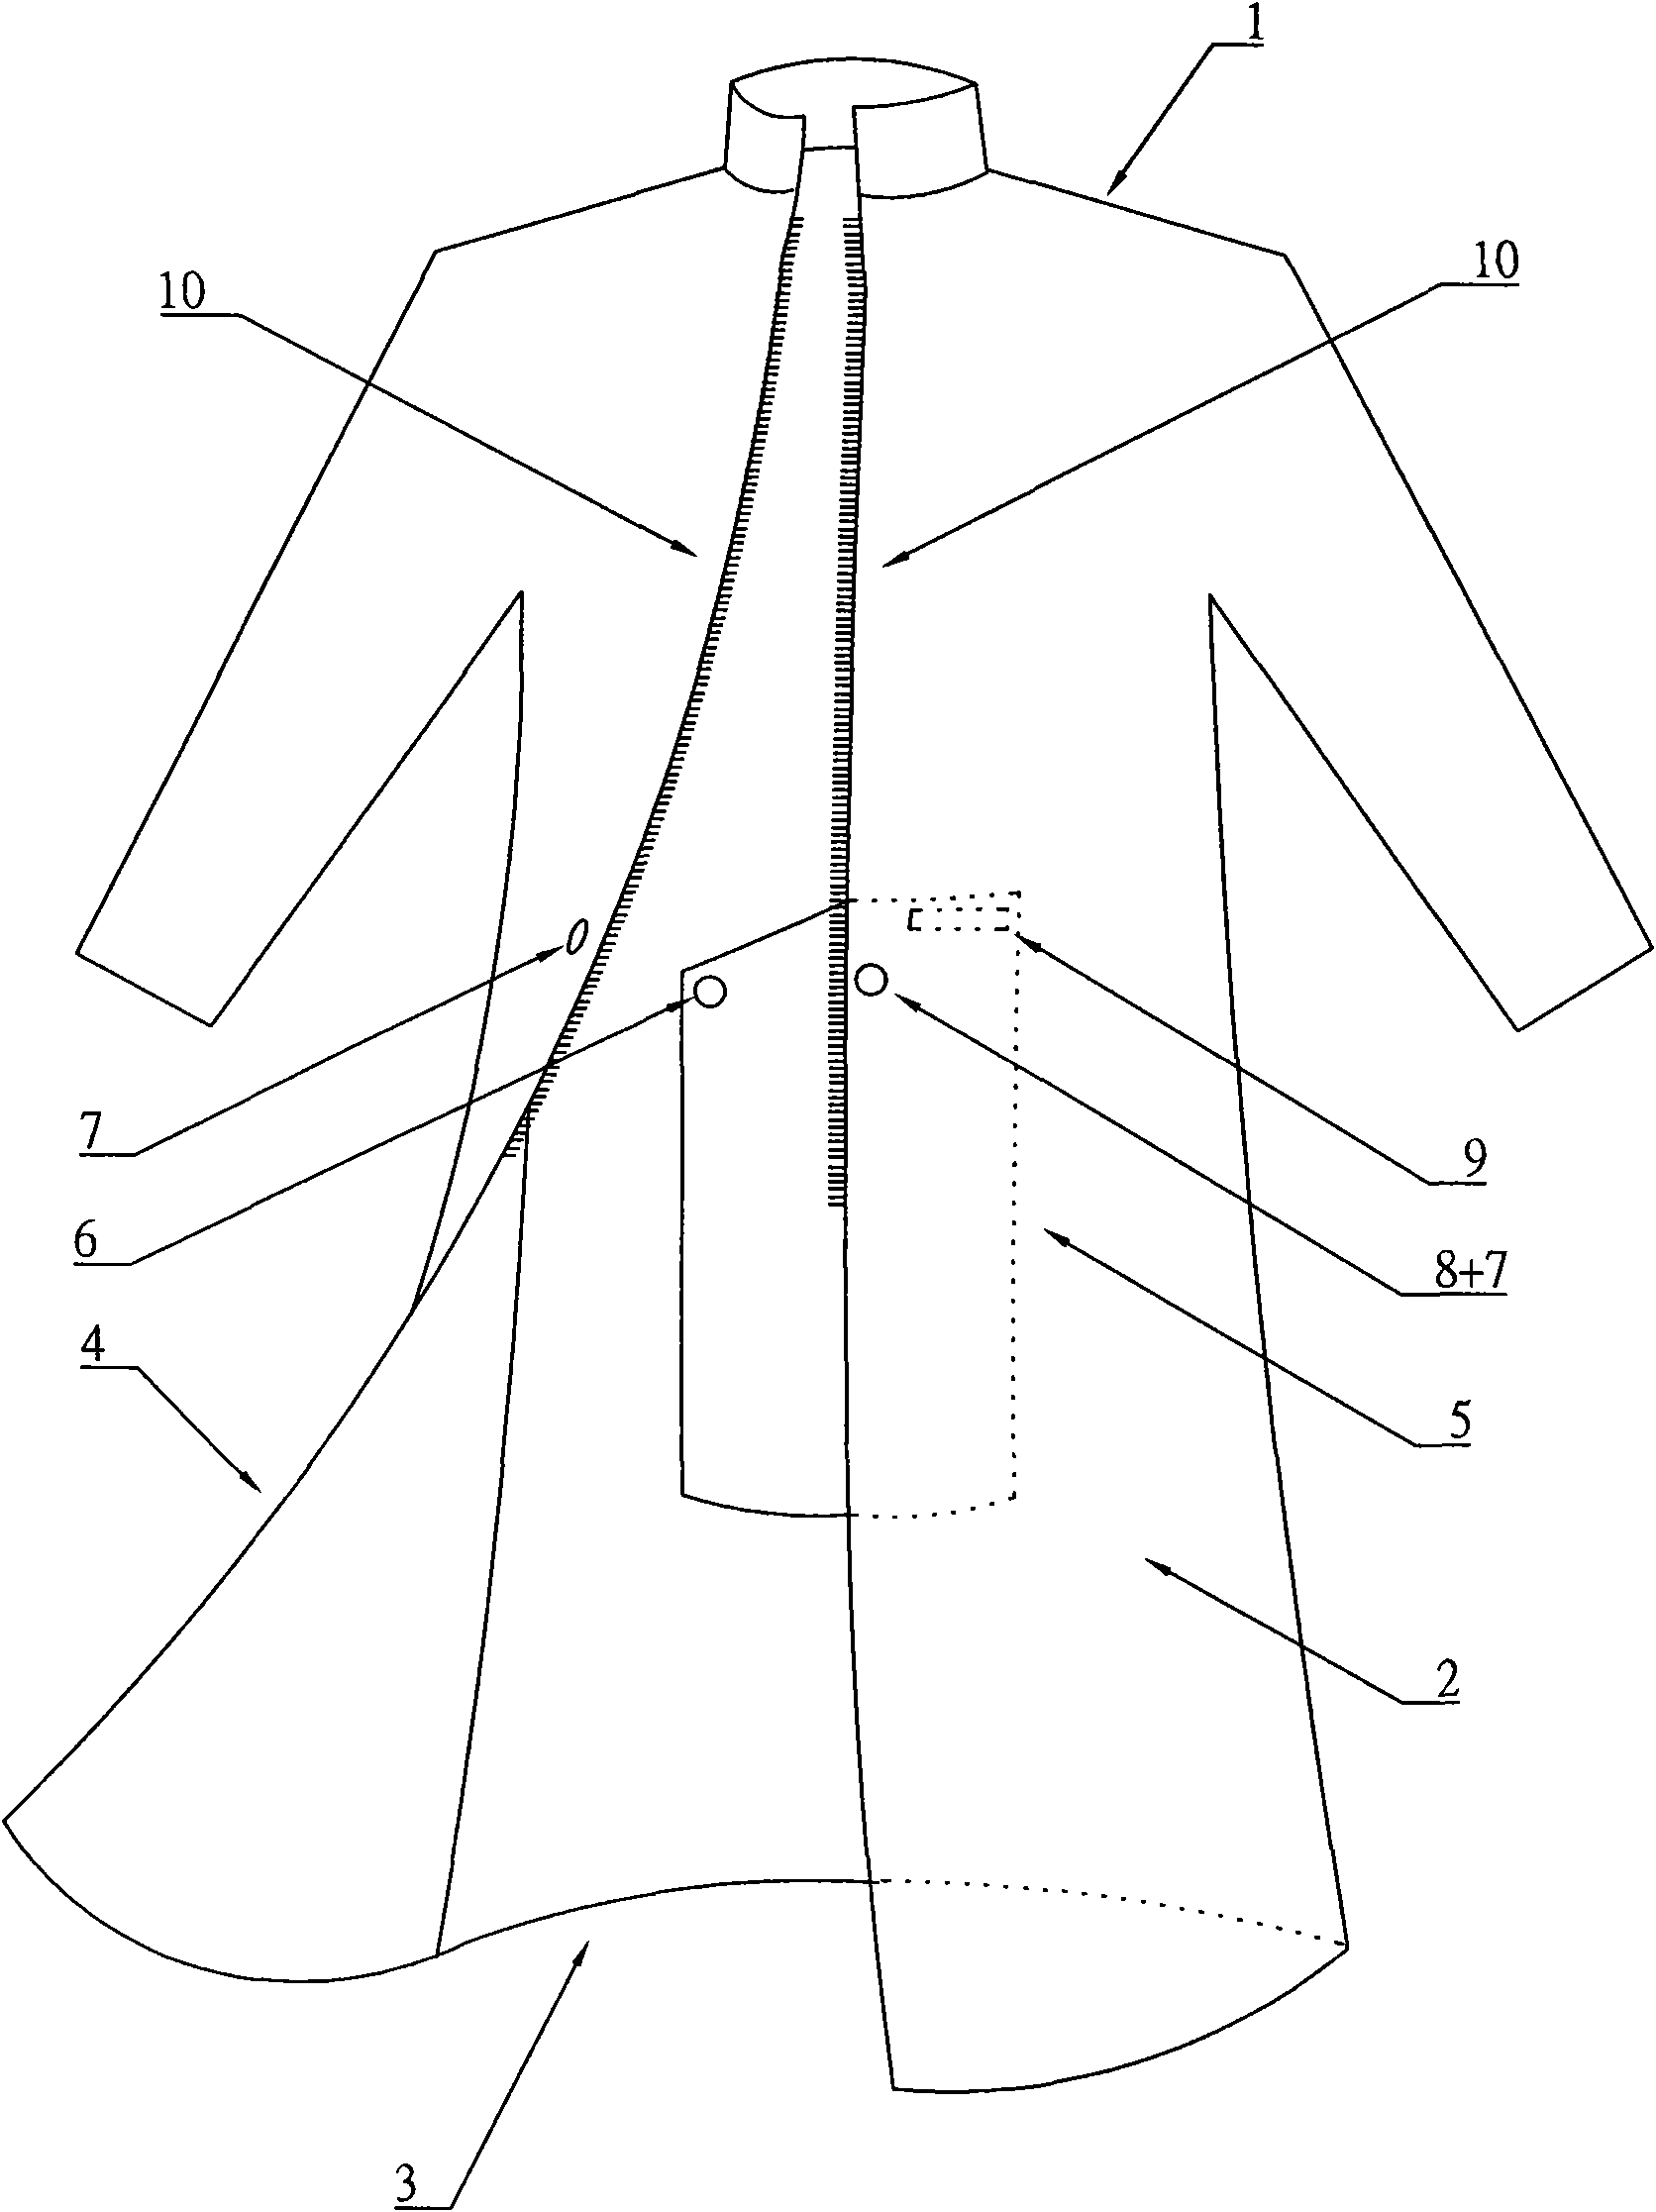 Shielding plate structure of open-fronted raincoat